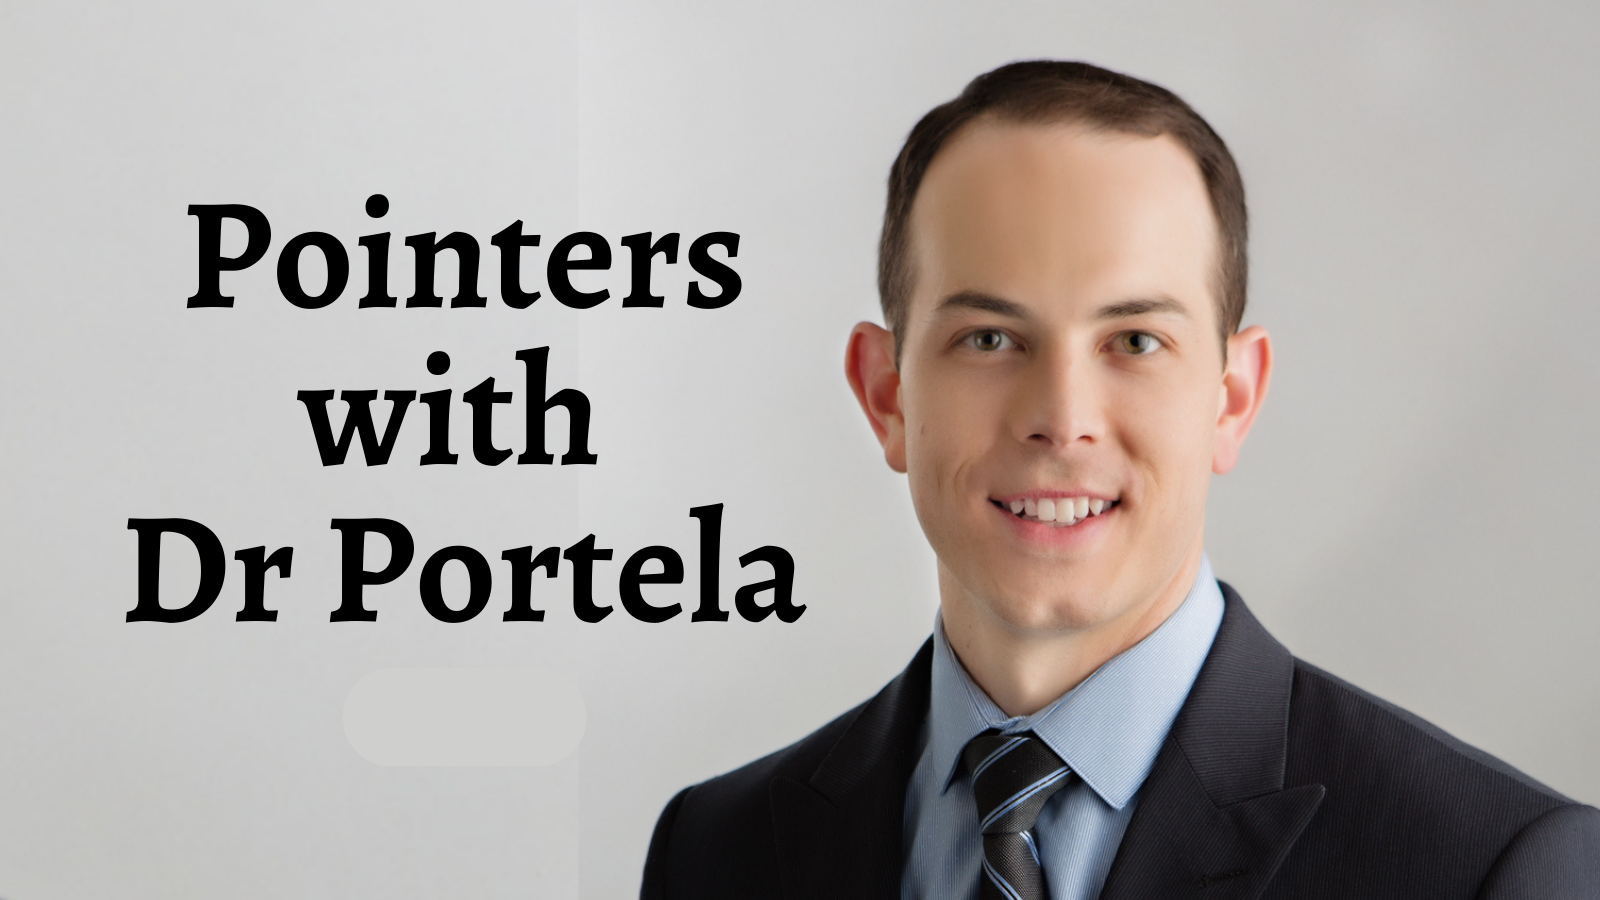 Pointers With Dr Portela: Can Keratosis Pilaris Be Cured?